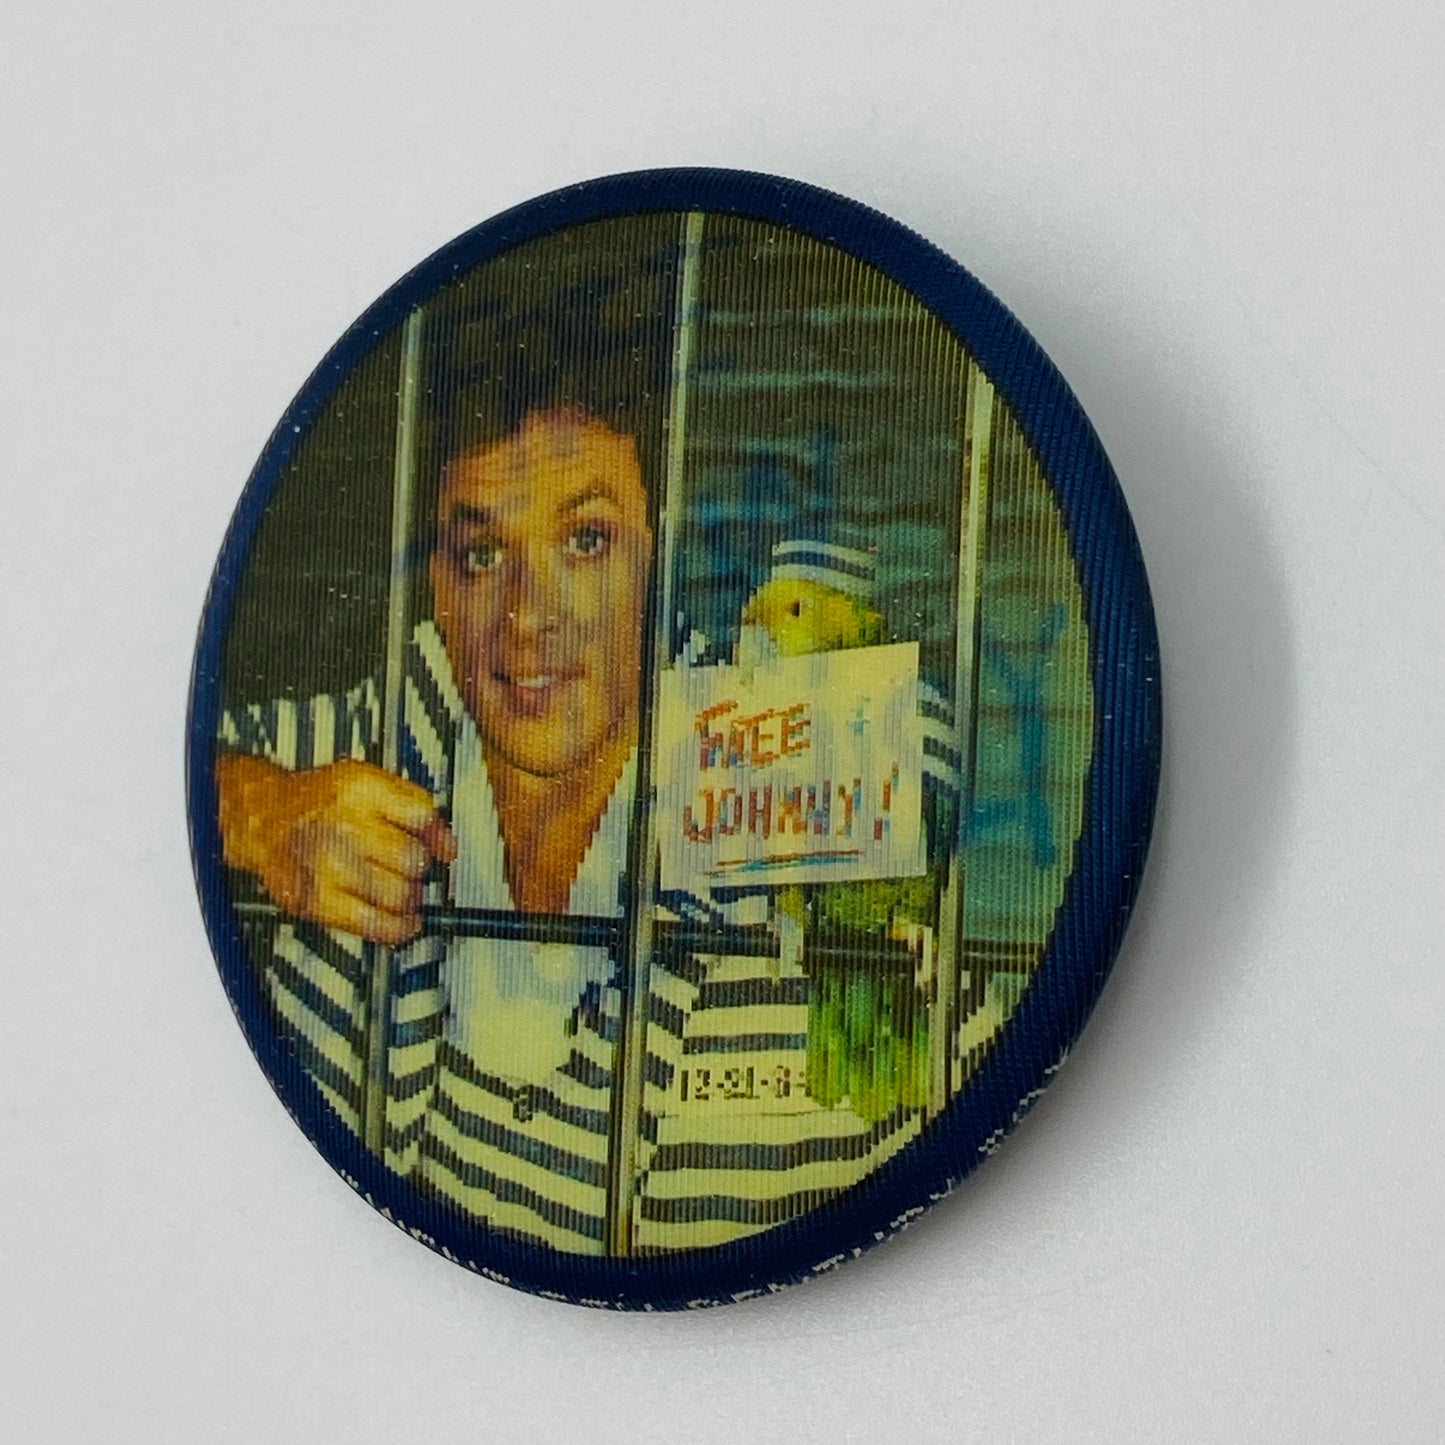 Johnny Dangerously: Free Johnny Dangerously lenticular promo pinback button (1984)